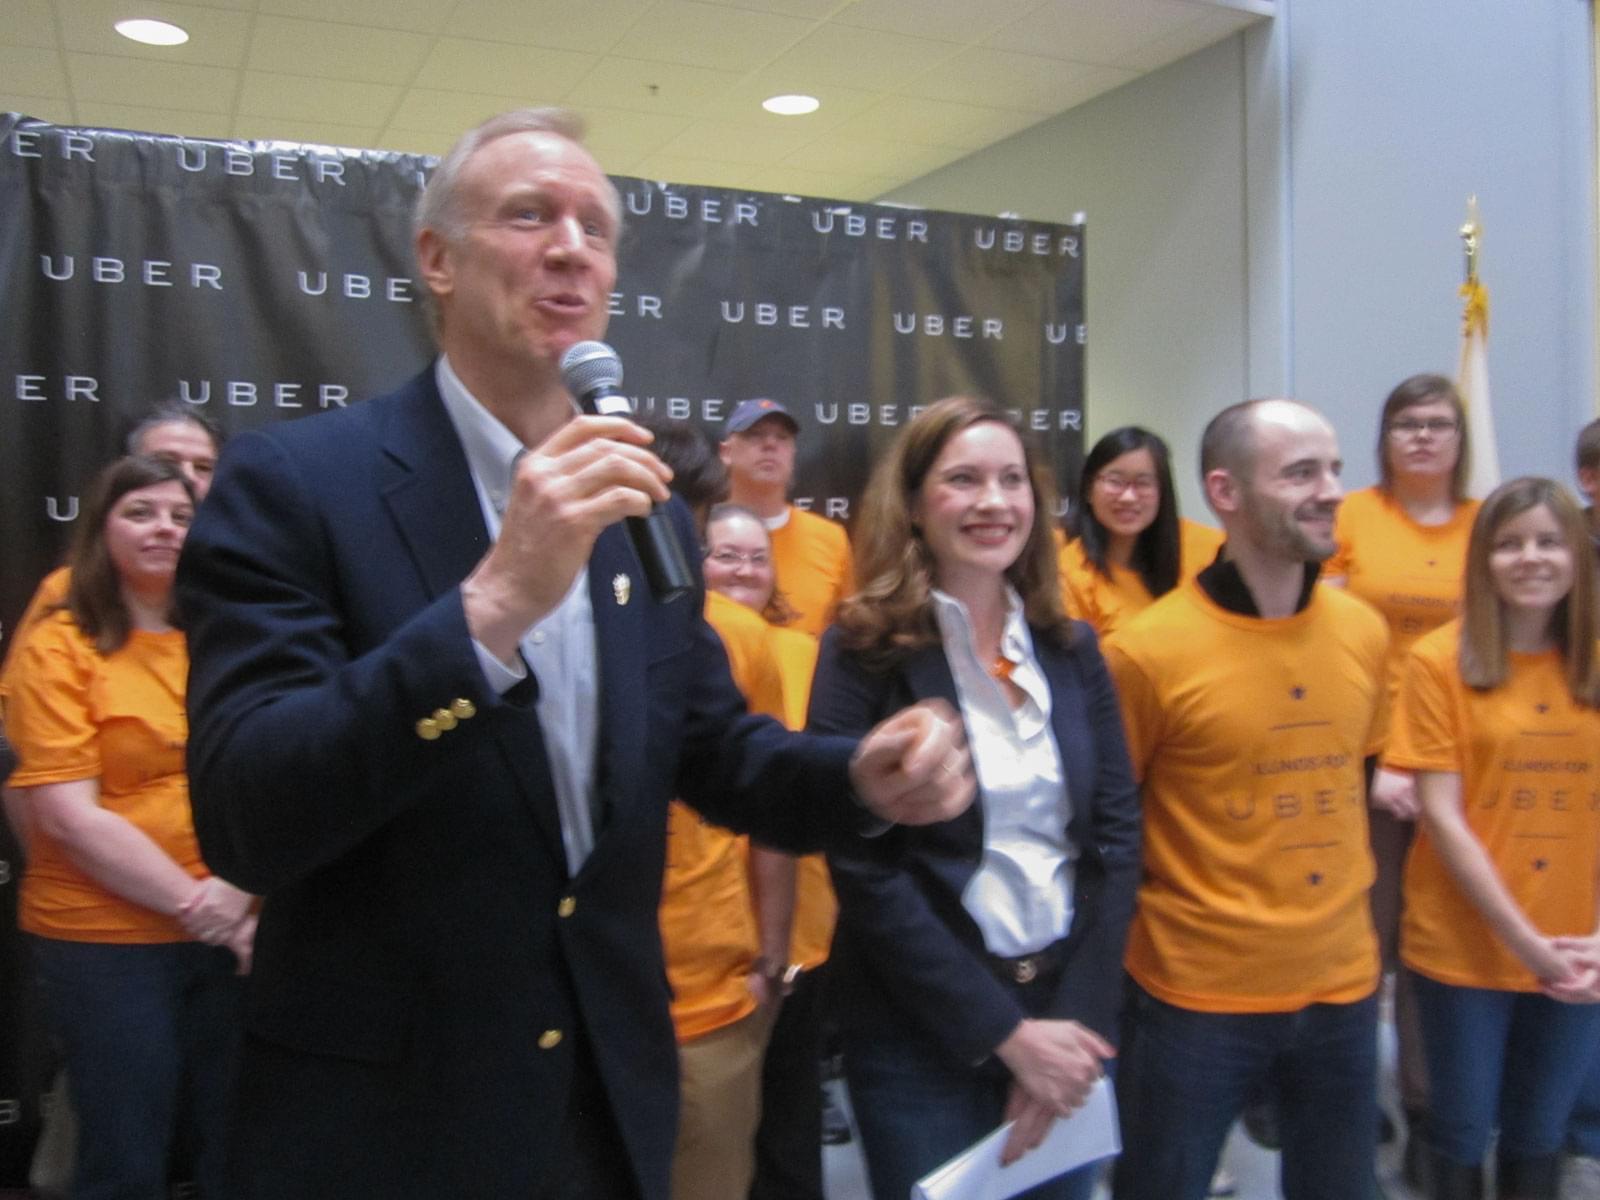 Governor Bruce Rauner as part of the launch of Uber in Champaign-Urbana at EnterpriseWorks in Champaign Sunday.